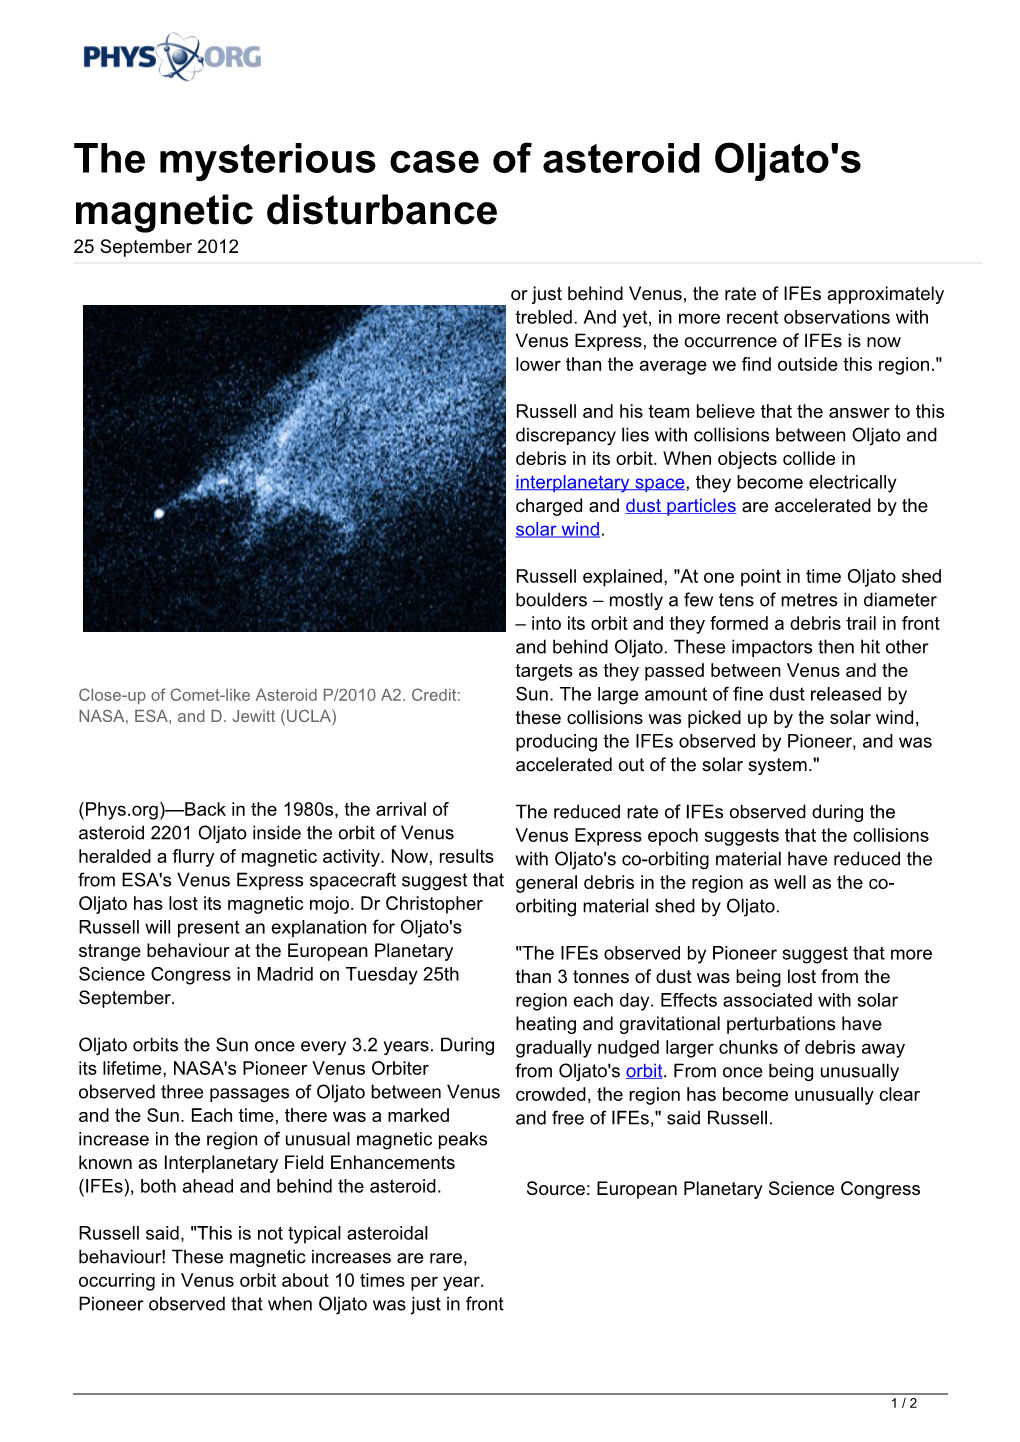 The Mysterious Case of Asteroid Oljato's Magnetic Disturbance 25 September 2012